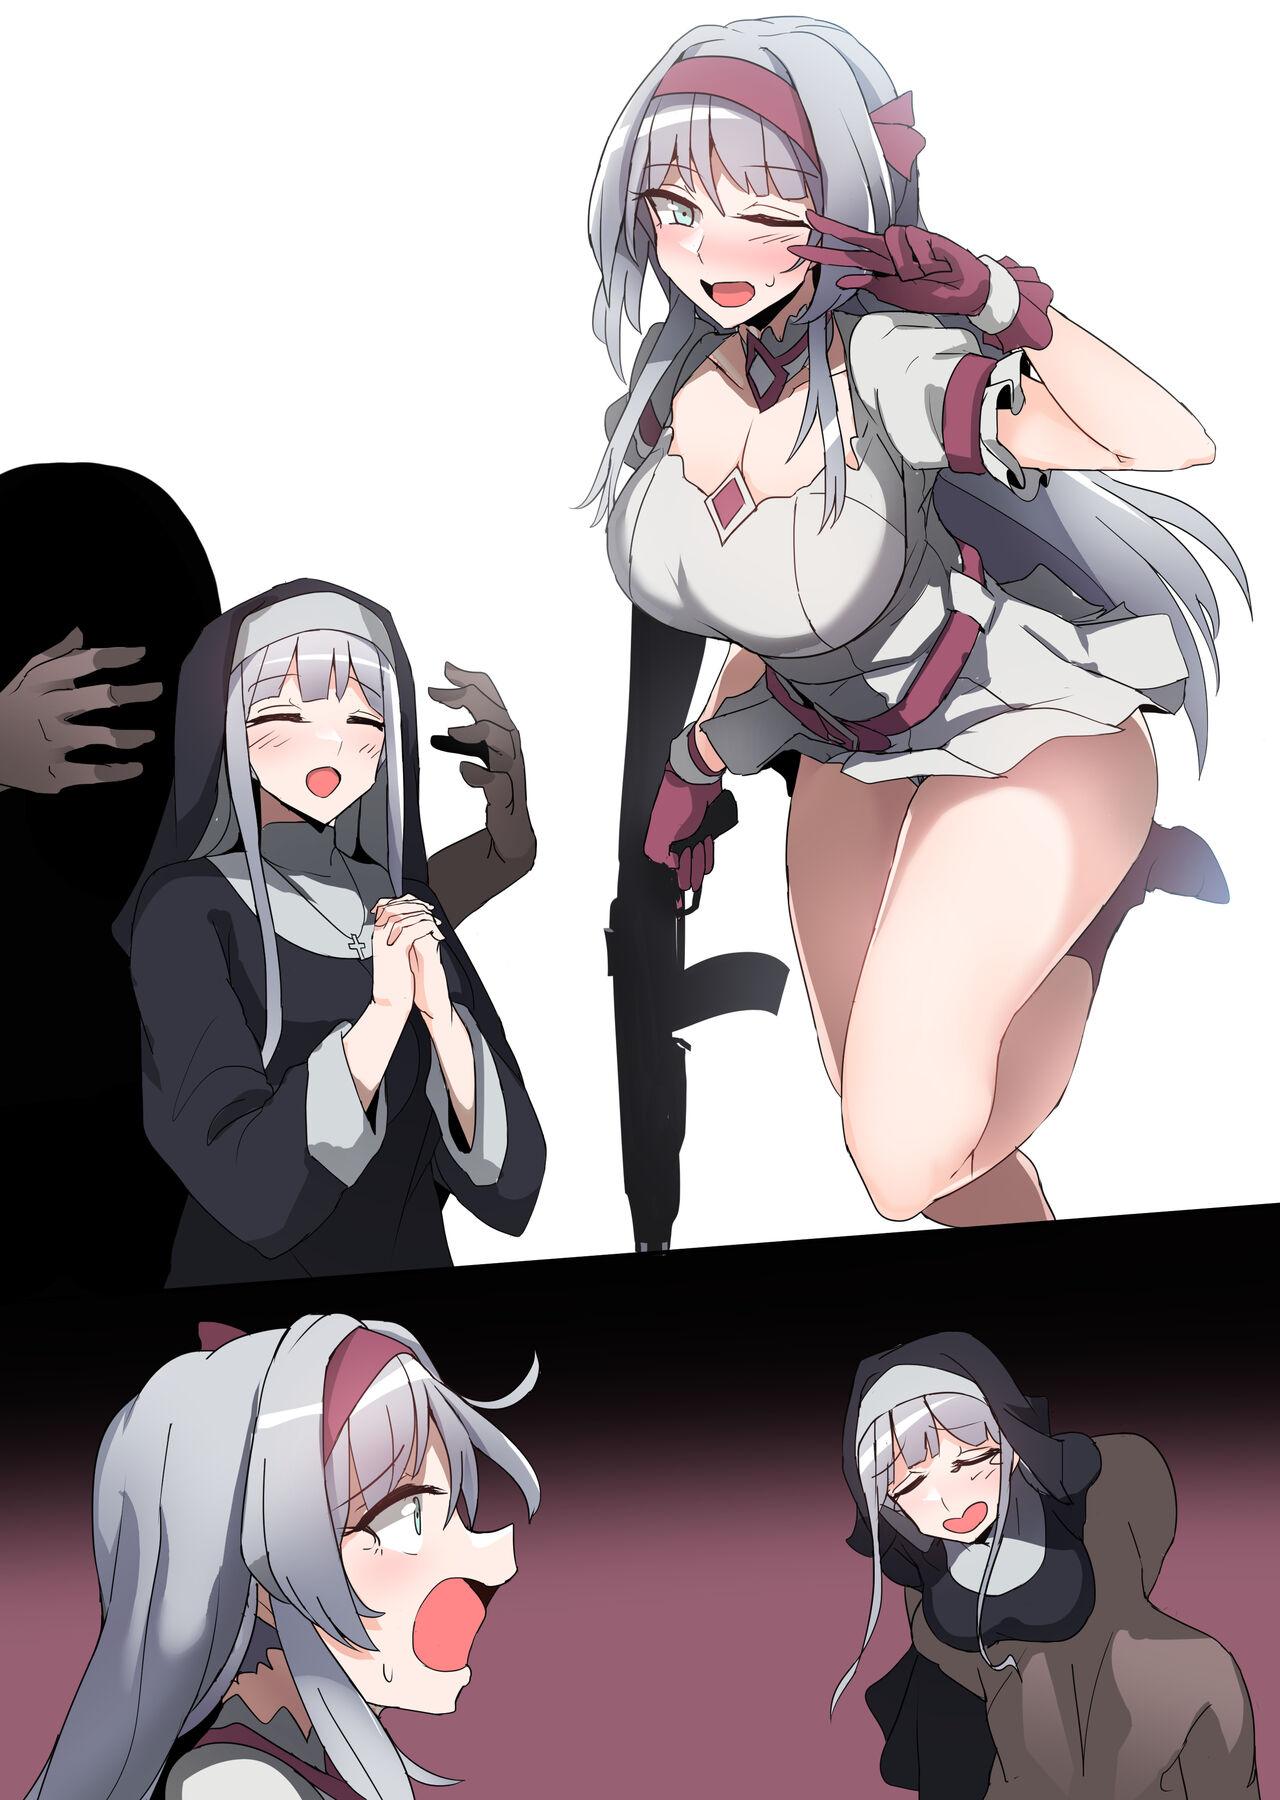 Menage To Be Continued.... - Girls frontline Gay Bukkake - Picture 1